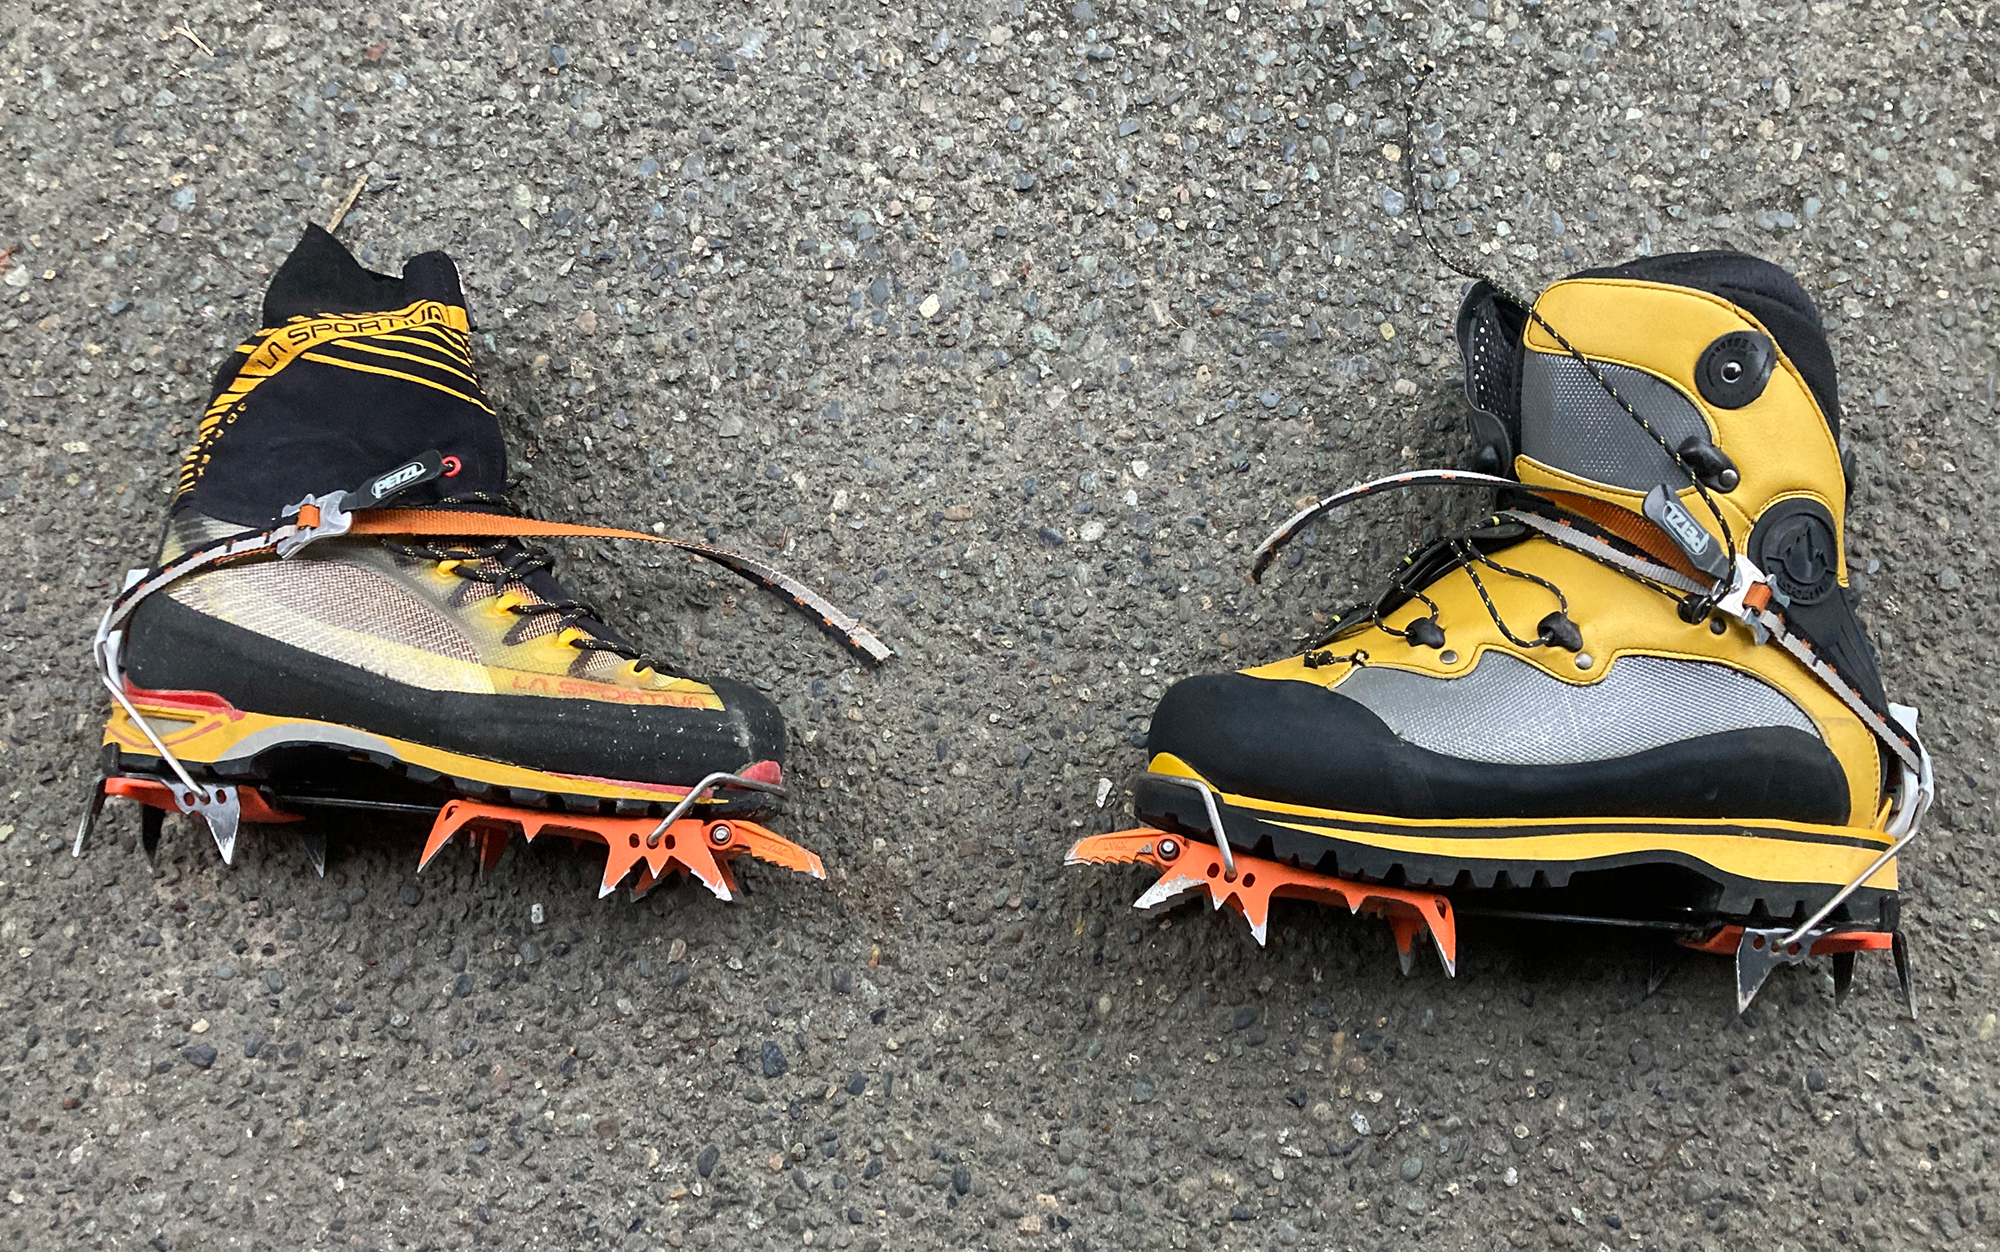 A soft toed boot and hard toed boot in the Petzl Irvis Hybrid crampons.